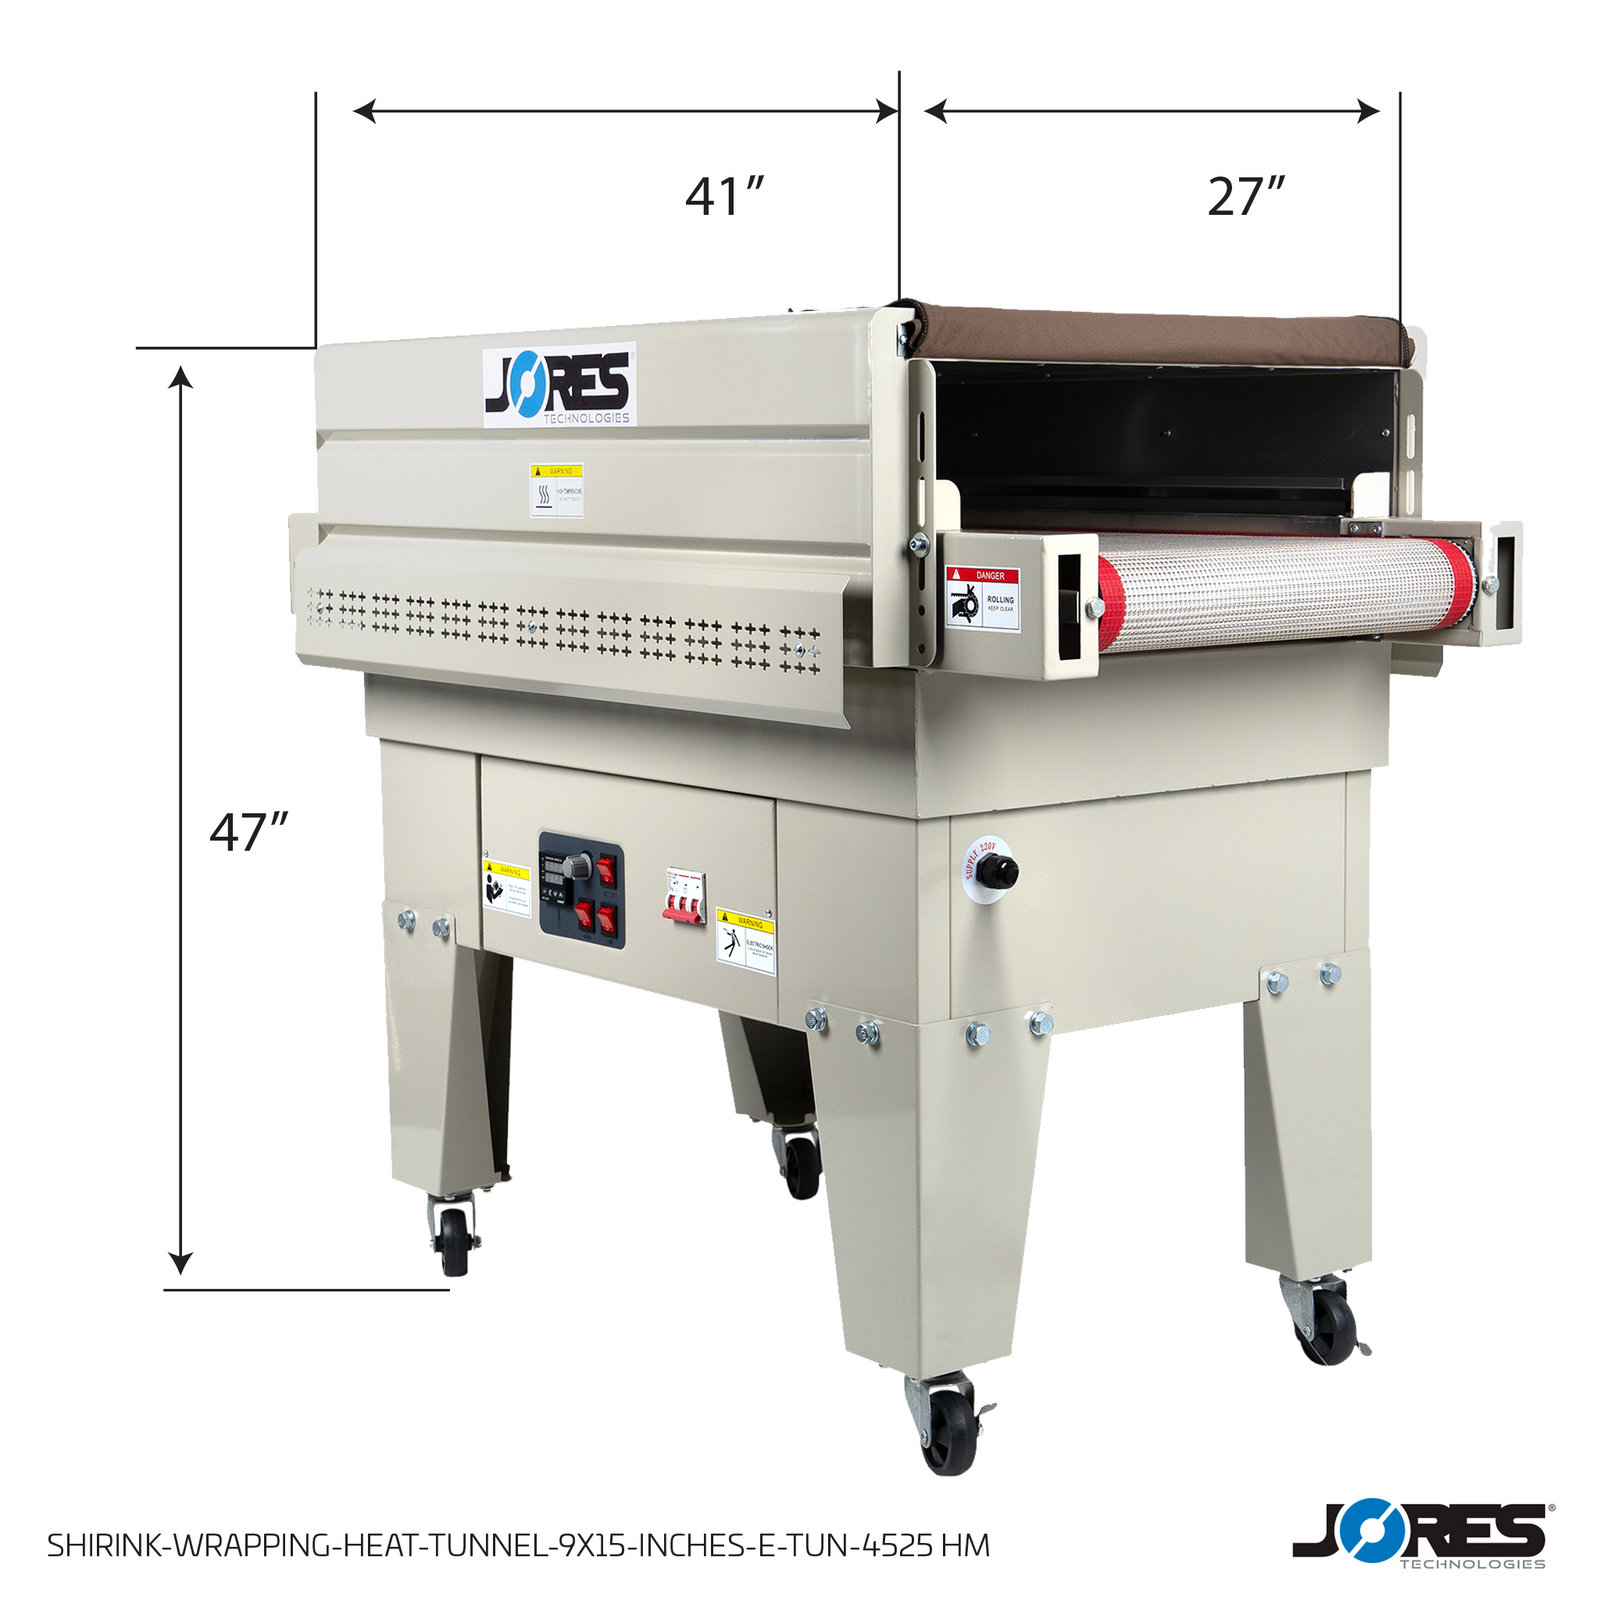 Measurements of a Shrink Wrapping Heat Tunnel with Mesh Conveyor Belt – 9 X 15 by JORES TECHNOLOGIES